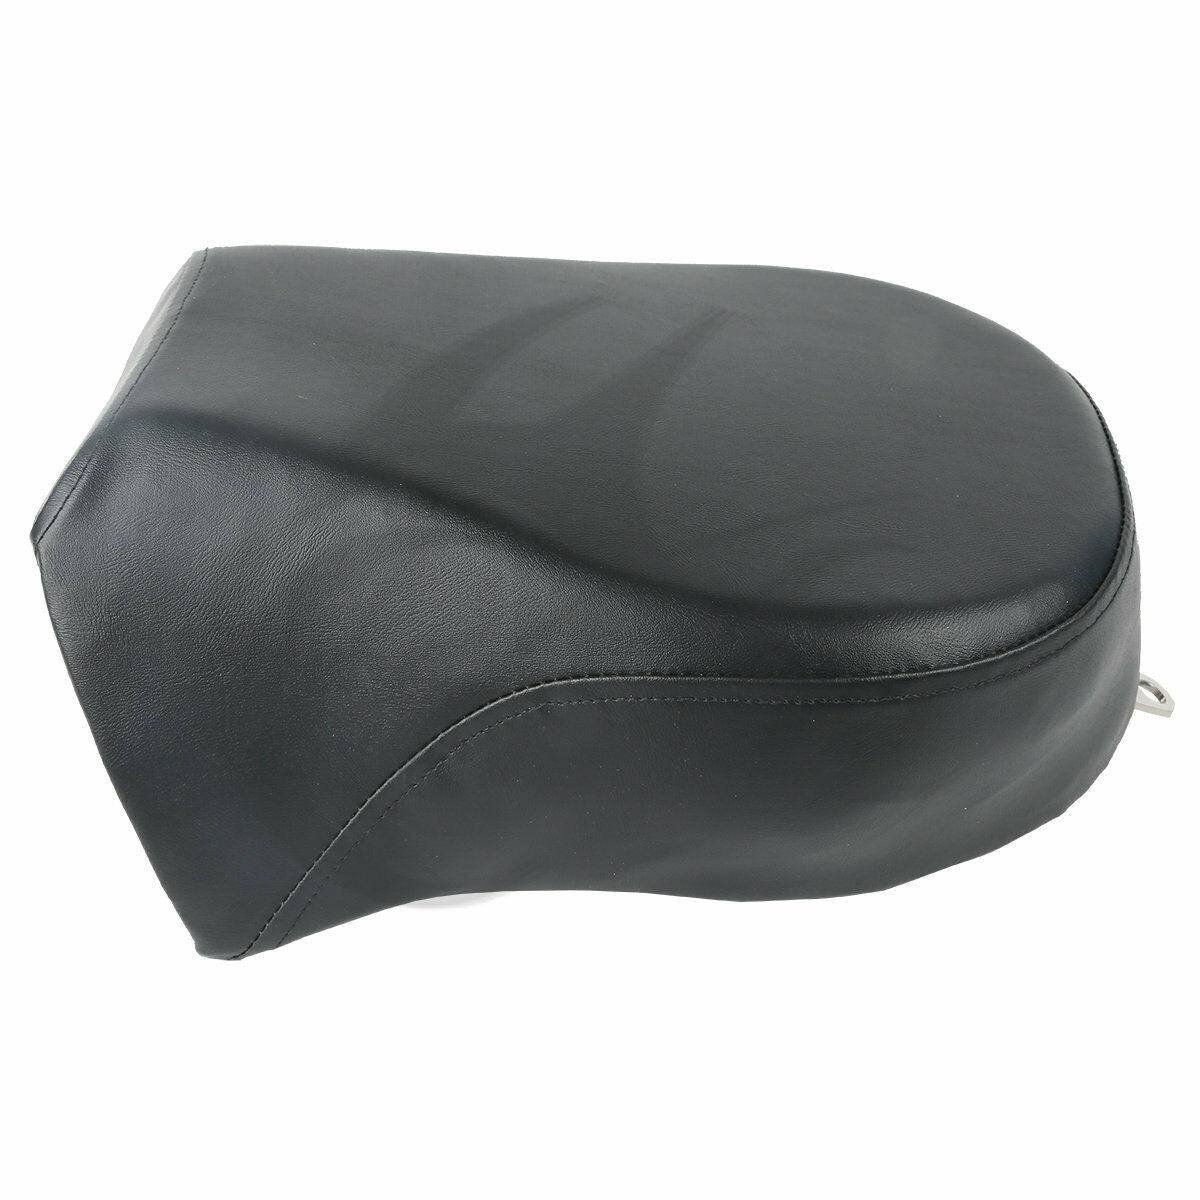 Rear Passenger Seat For Harley Sportster XL883 XL1200 2007-15 replaces 51744-07A - Moto Life Products